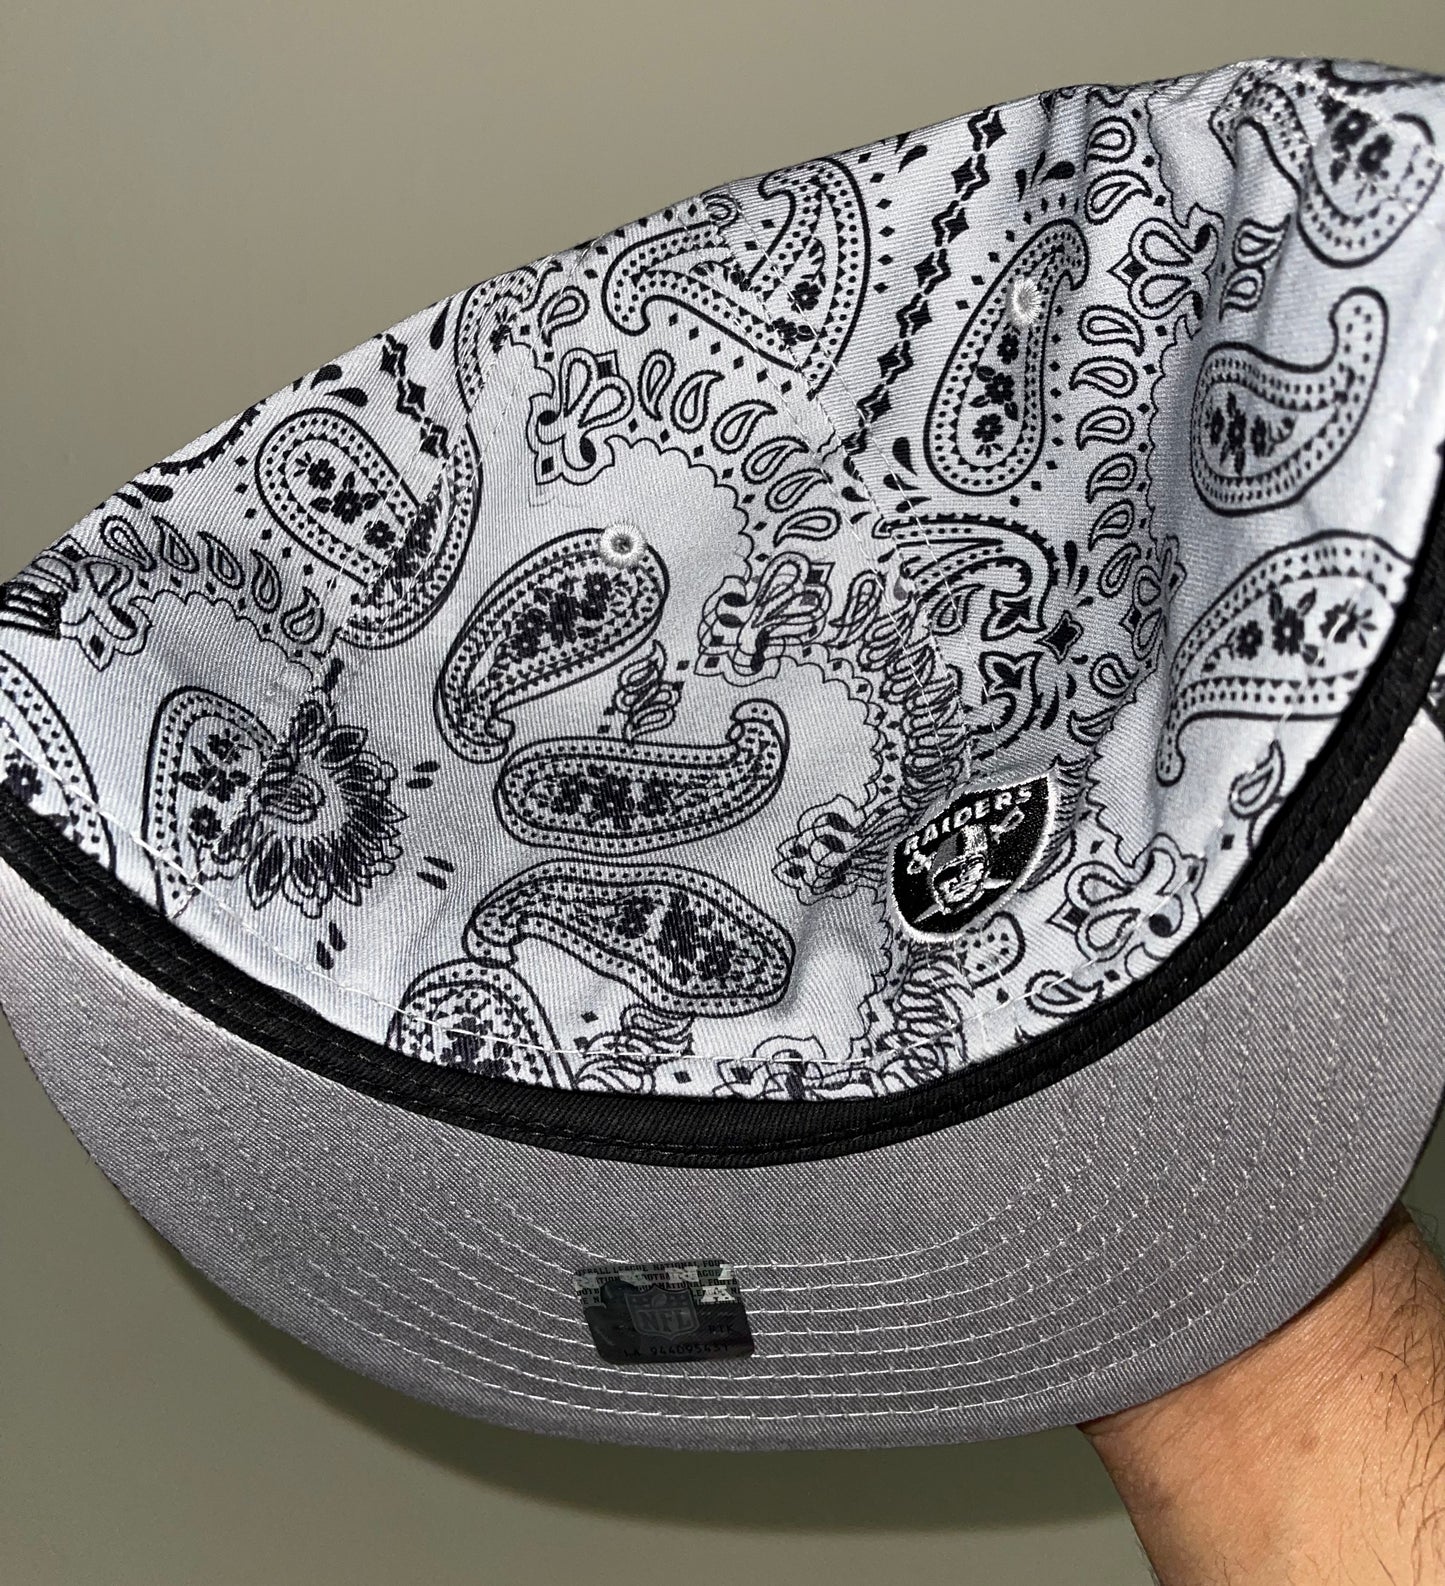 Oakland/Las Vegas Raiders NFL Draft 98 Side Patch Fitted Hat New Era 5950 (Paisley Black/Gray)